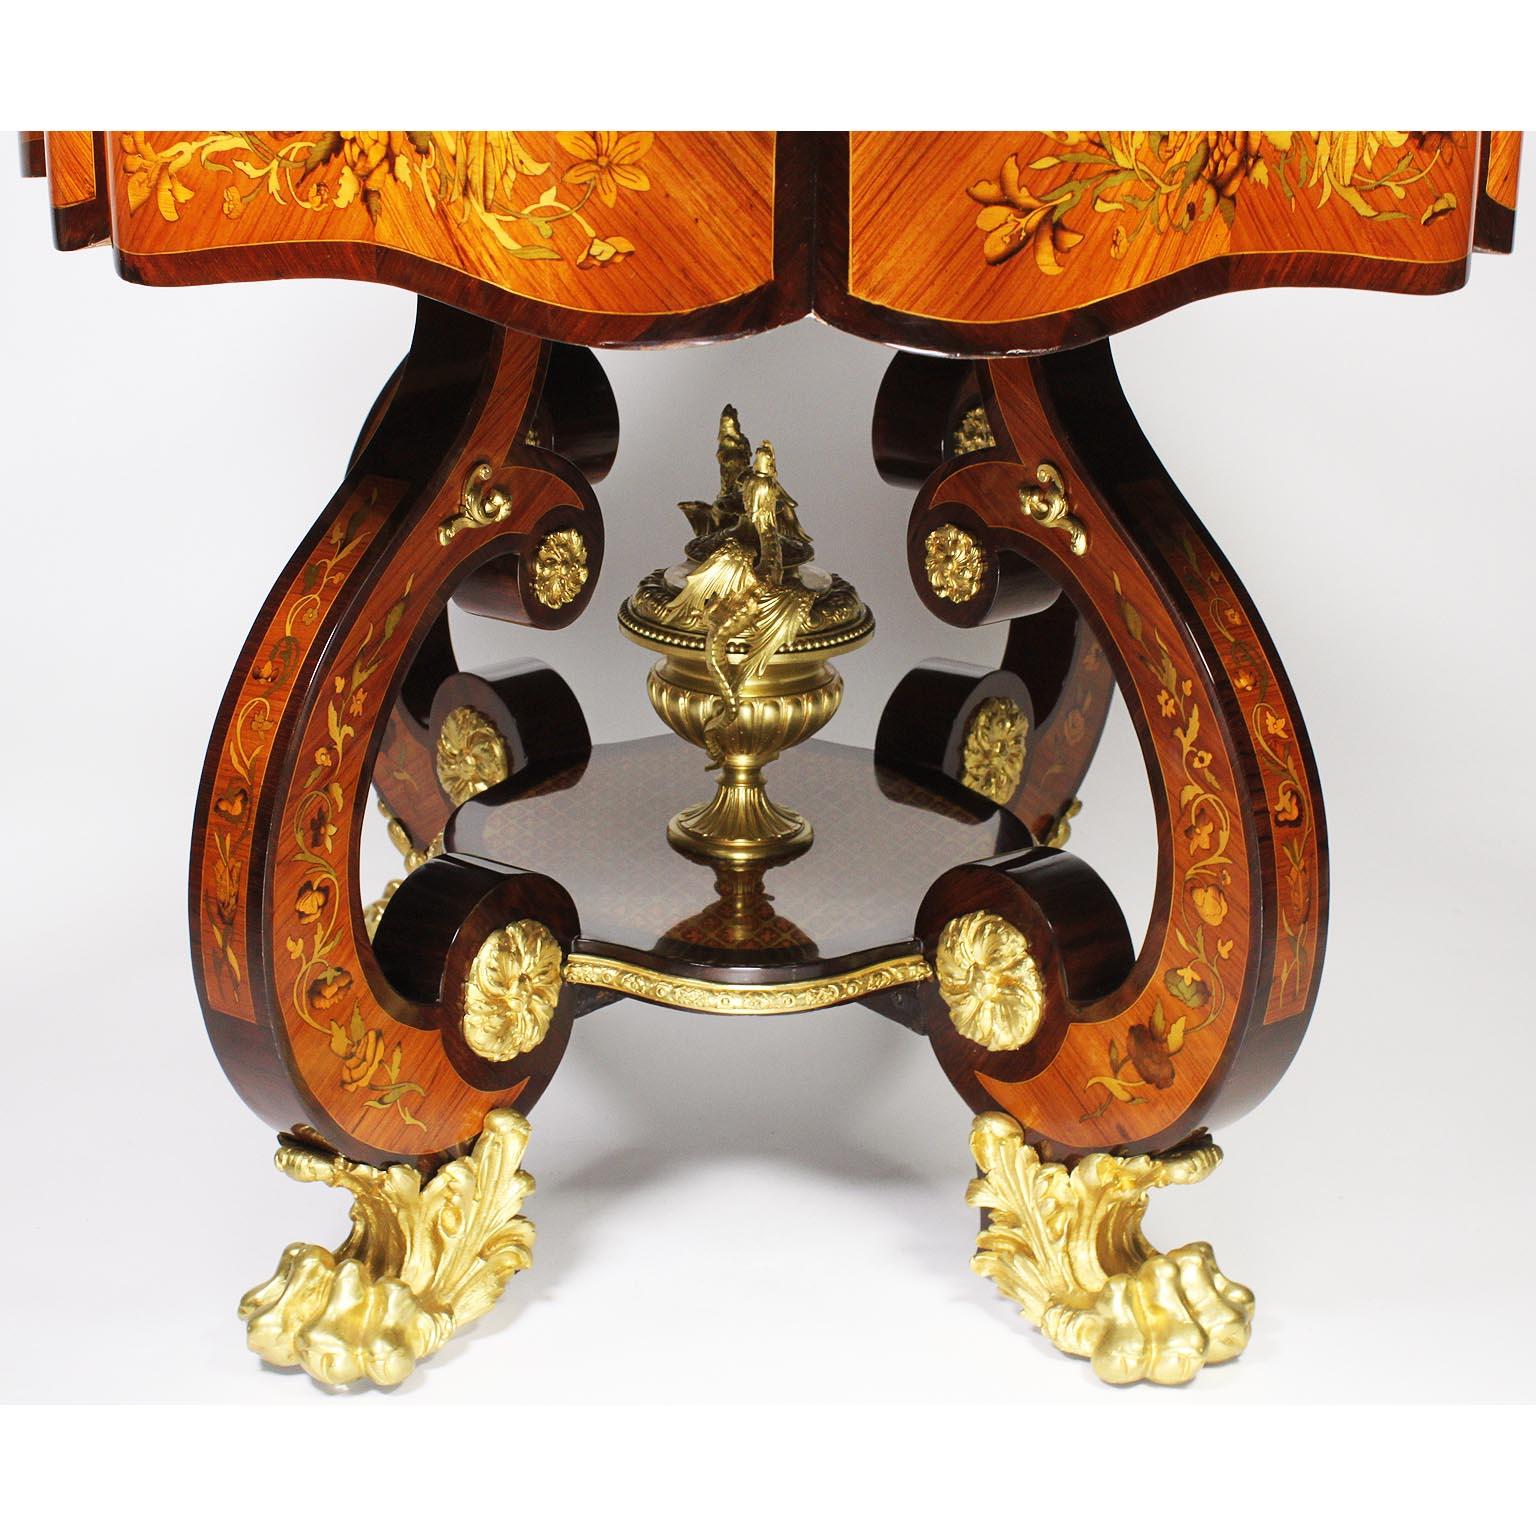 Fine Italian 19th Century Floral Marquetry Gilt Bronze-Mounted Center Table Desk For Sale 13